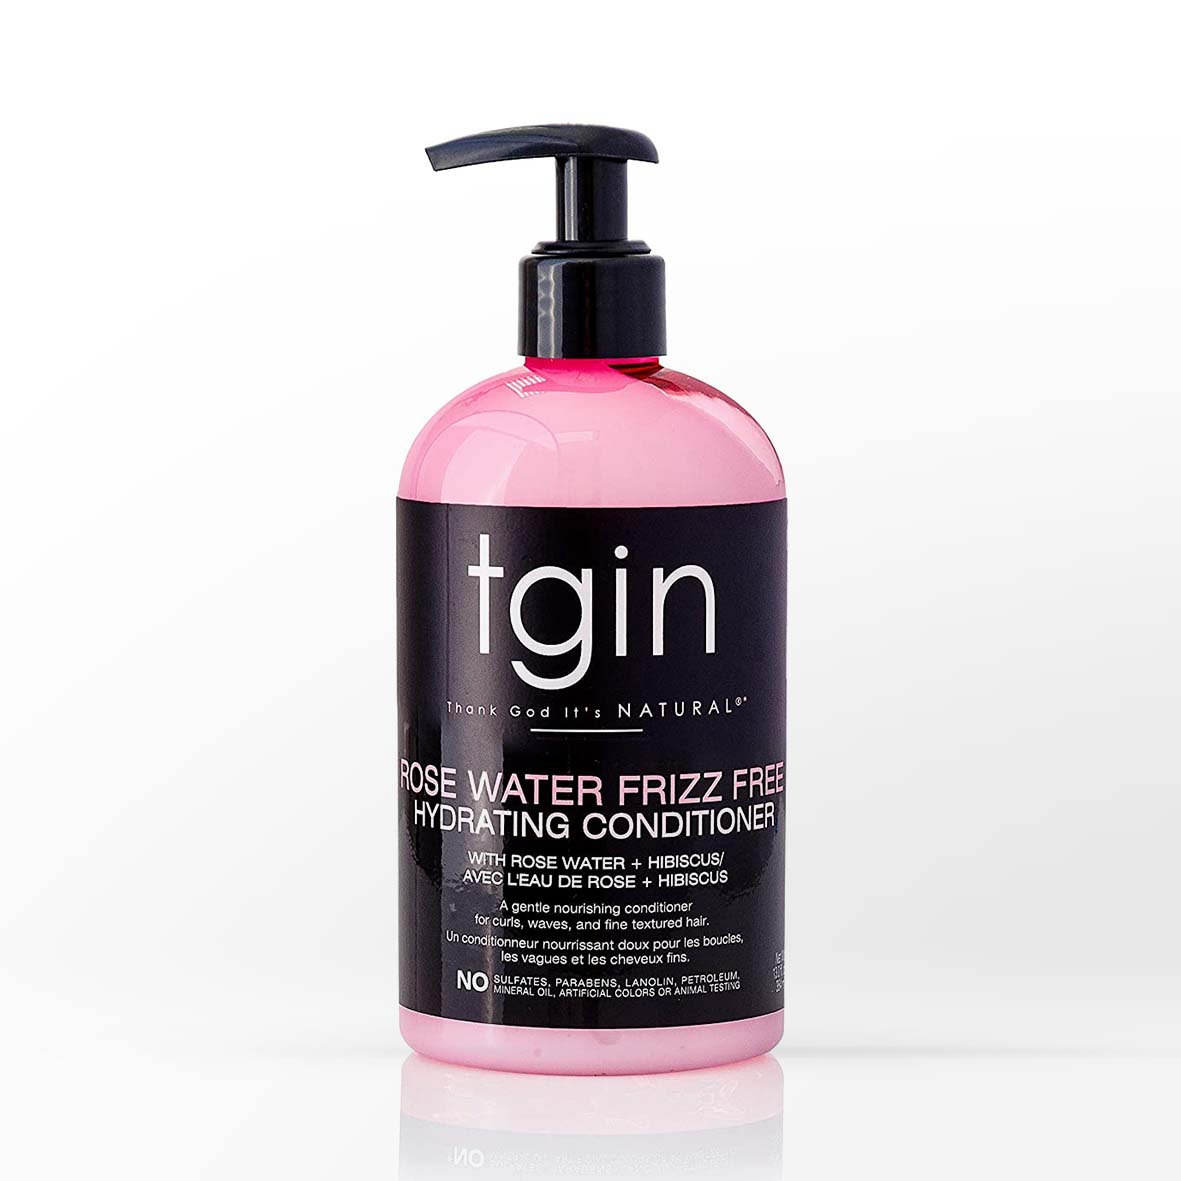 TGIN THANK GOD IT'S NATURAL ROSE WATER FRIZZ FREE HYDRATING CONDITIONER W/ROSE WATER + ACAI BERRY